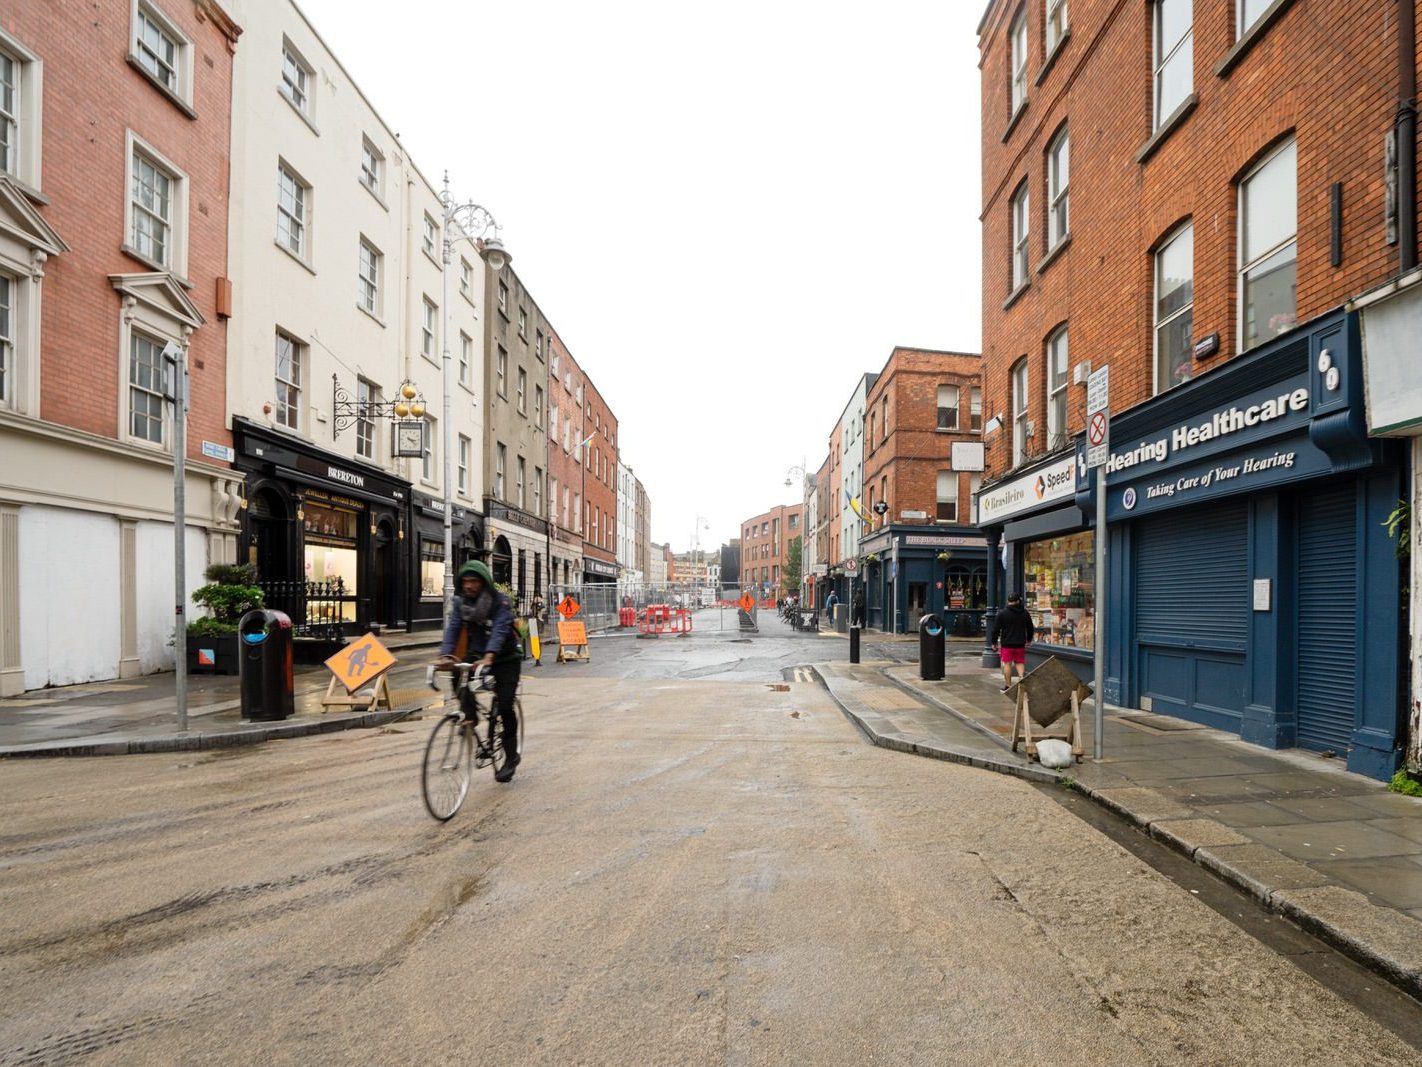 CAPEL STREET ON A DULL WET DAY [INTERIM CAPEL STREET IMPROVEMENT WORKS ARE NOW ONGOING] 031